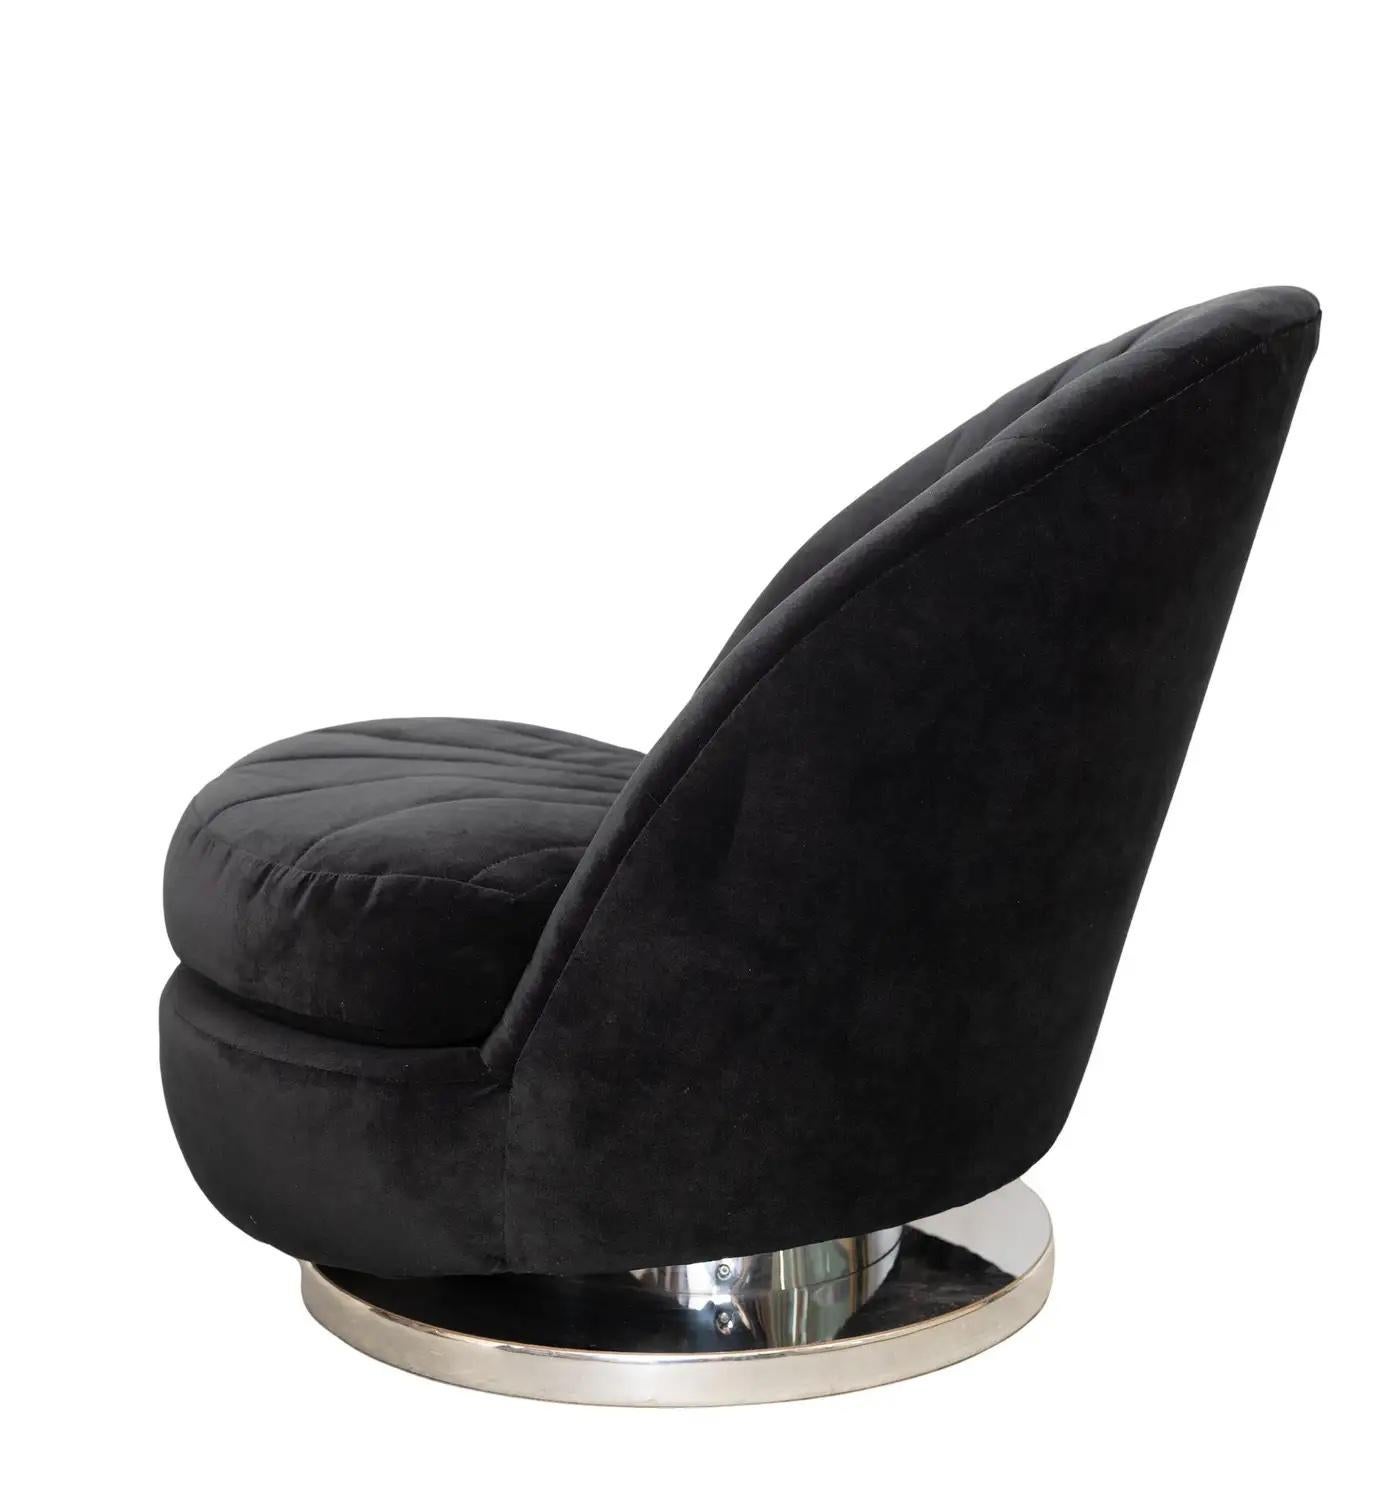 Pair Iconic Milo Baughman Swivel and Tilt Lounge Chairs in Black, Ca. 1975 For Sale 2